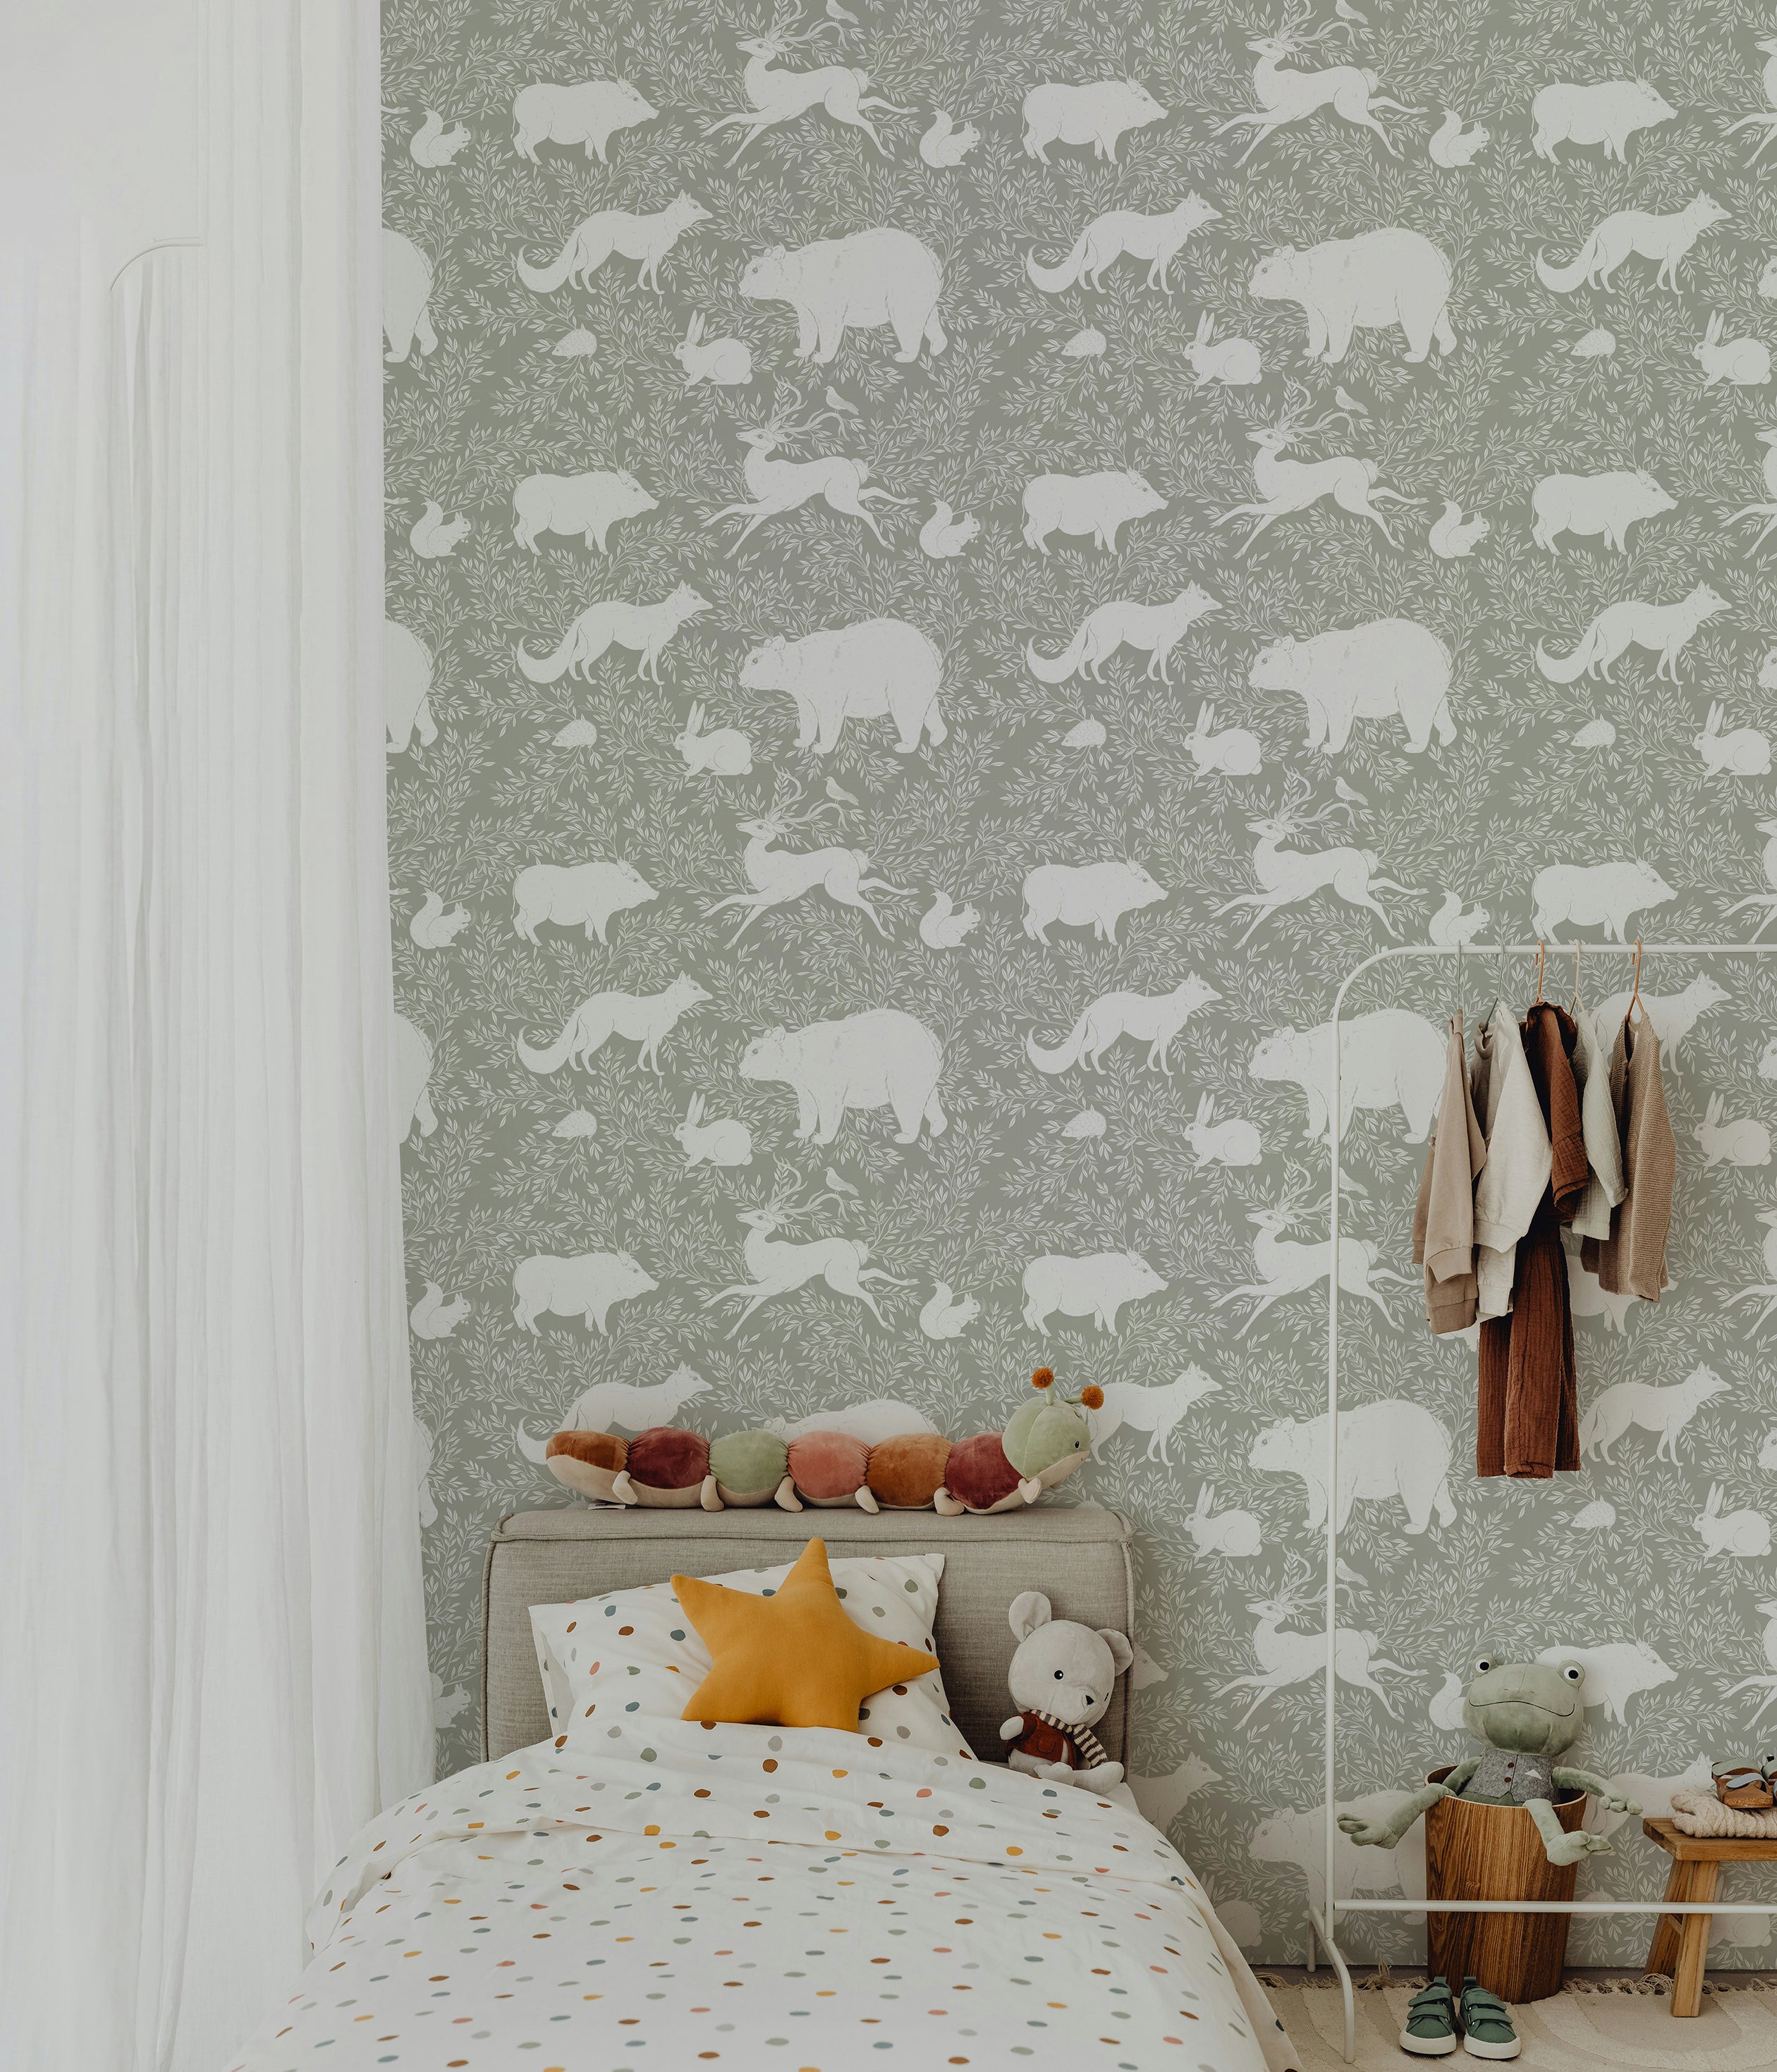 A children's bedroom with a bed dressed in polka dot bedding and stuffed animals, featuring a green wallpaper with white woodland animals like bears, foxes, and rabbits, creating a whimsical and calming atmosphere.